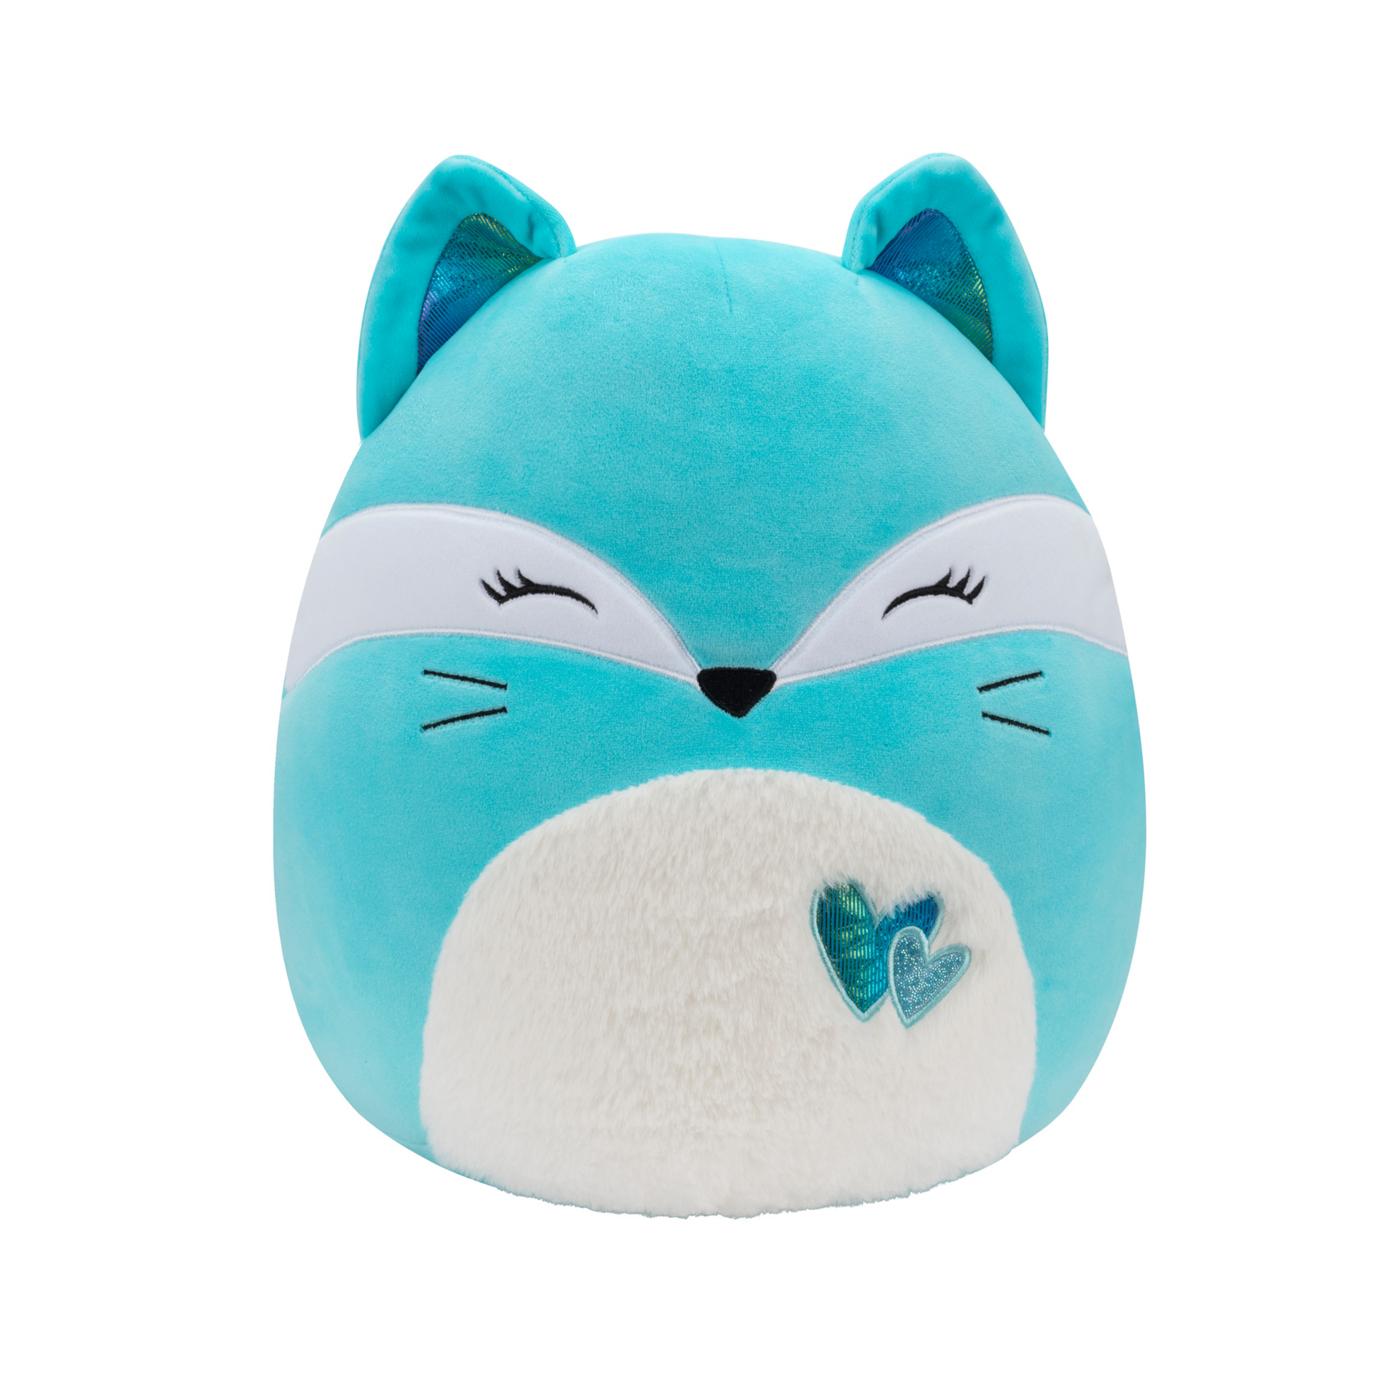 Squishmallows Pania the Teal Fox Valentine's Plush; image 1 of 3